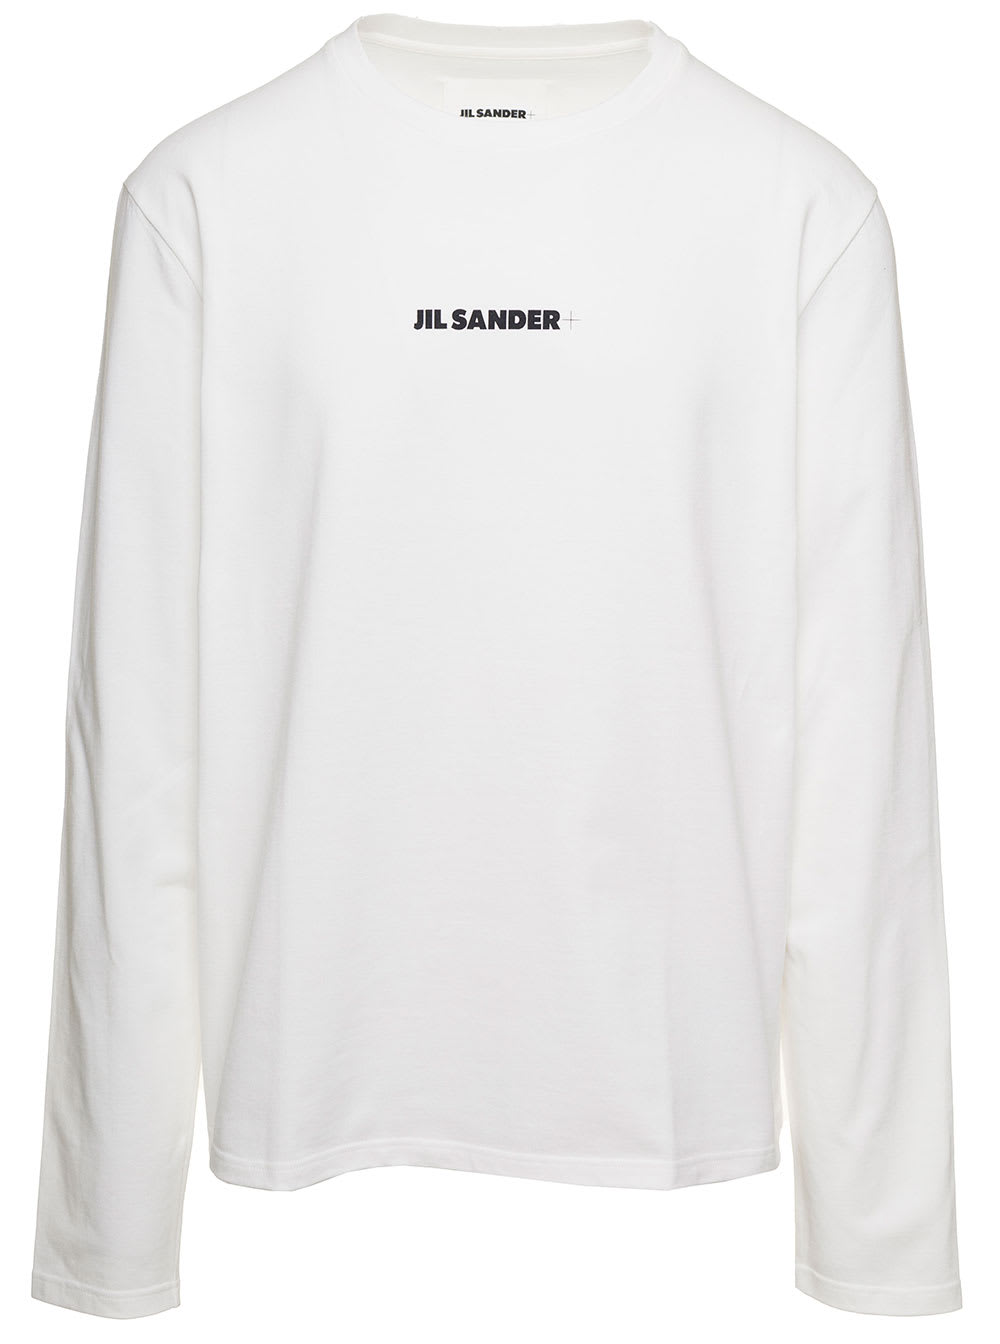 JIL SANDER WHITE LONG SLEEVE T-SHIRT WITH FRONT LOGO PRINT IN COTTON MAN